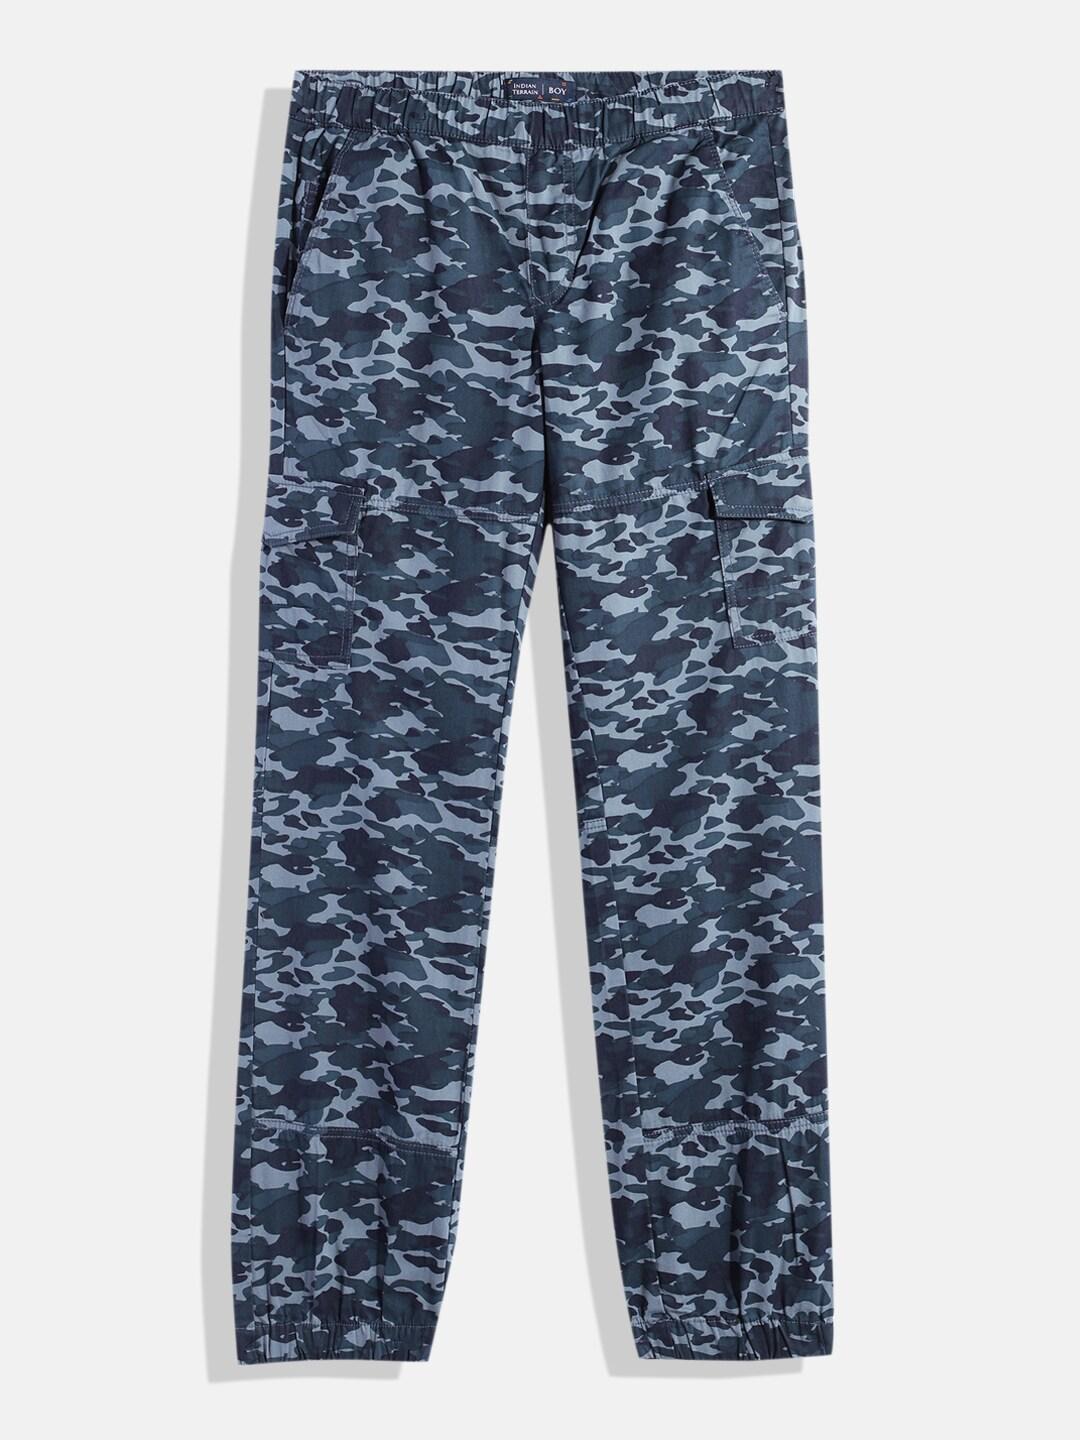 Indian Terrain Boys Camouflage Printed Pure Cotton Cargos Trousers